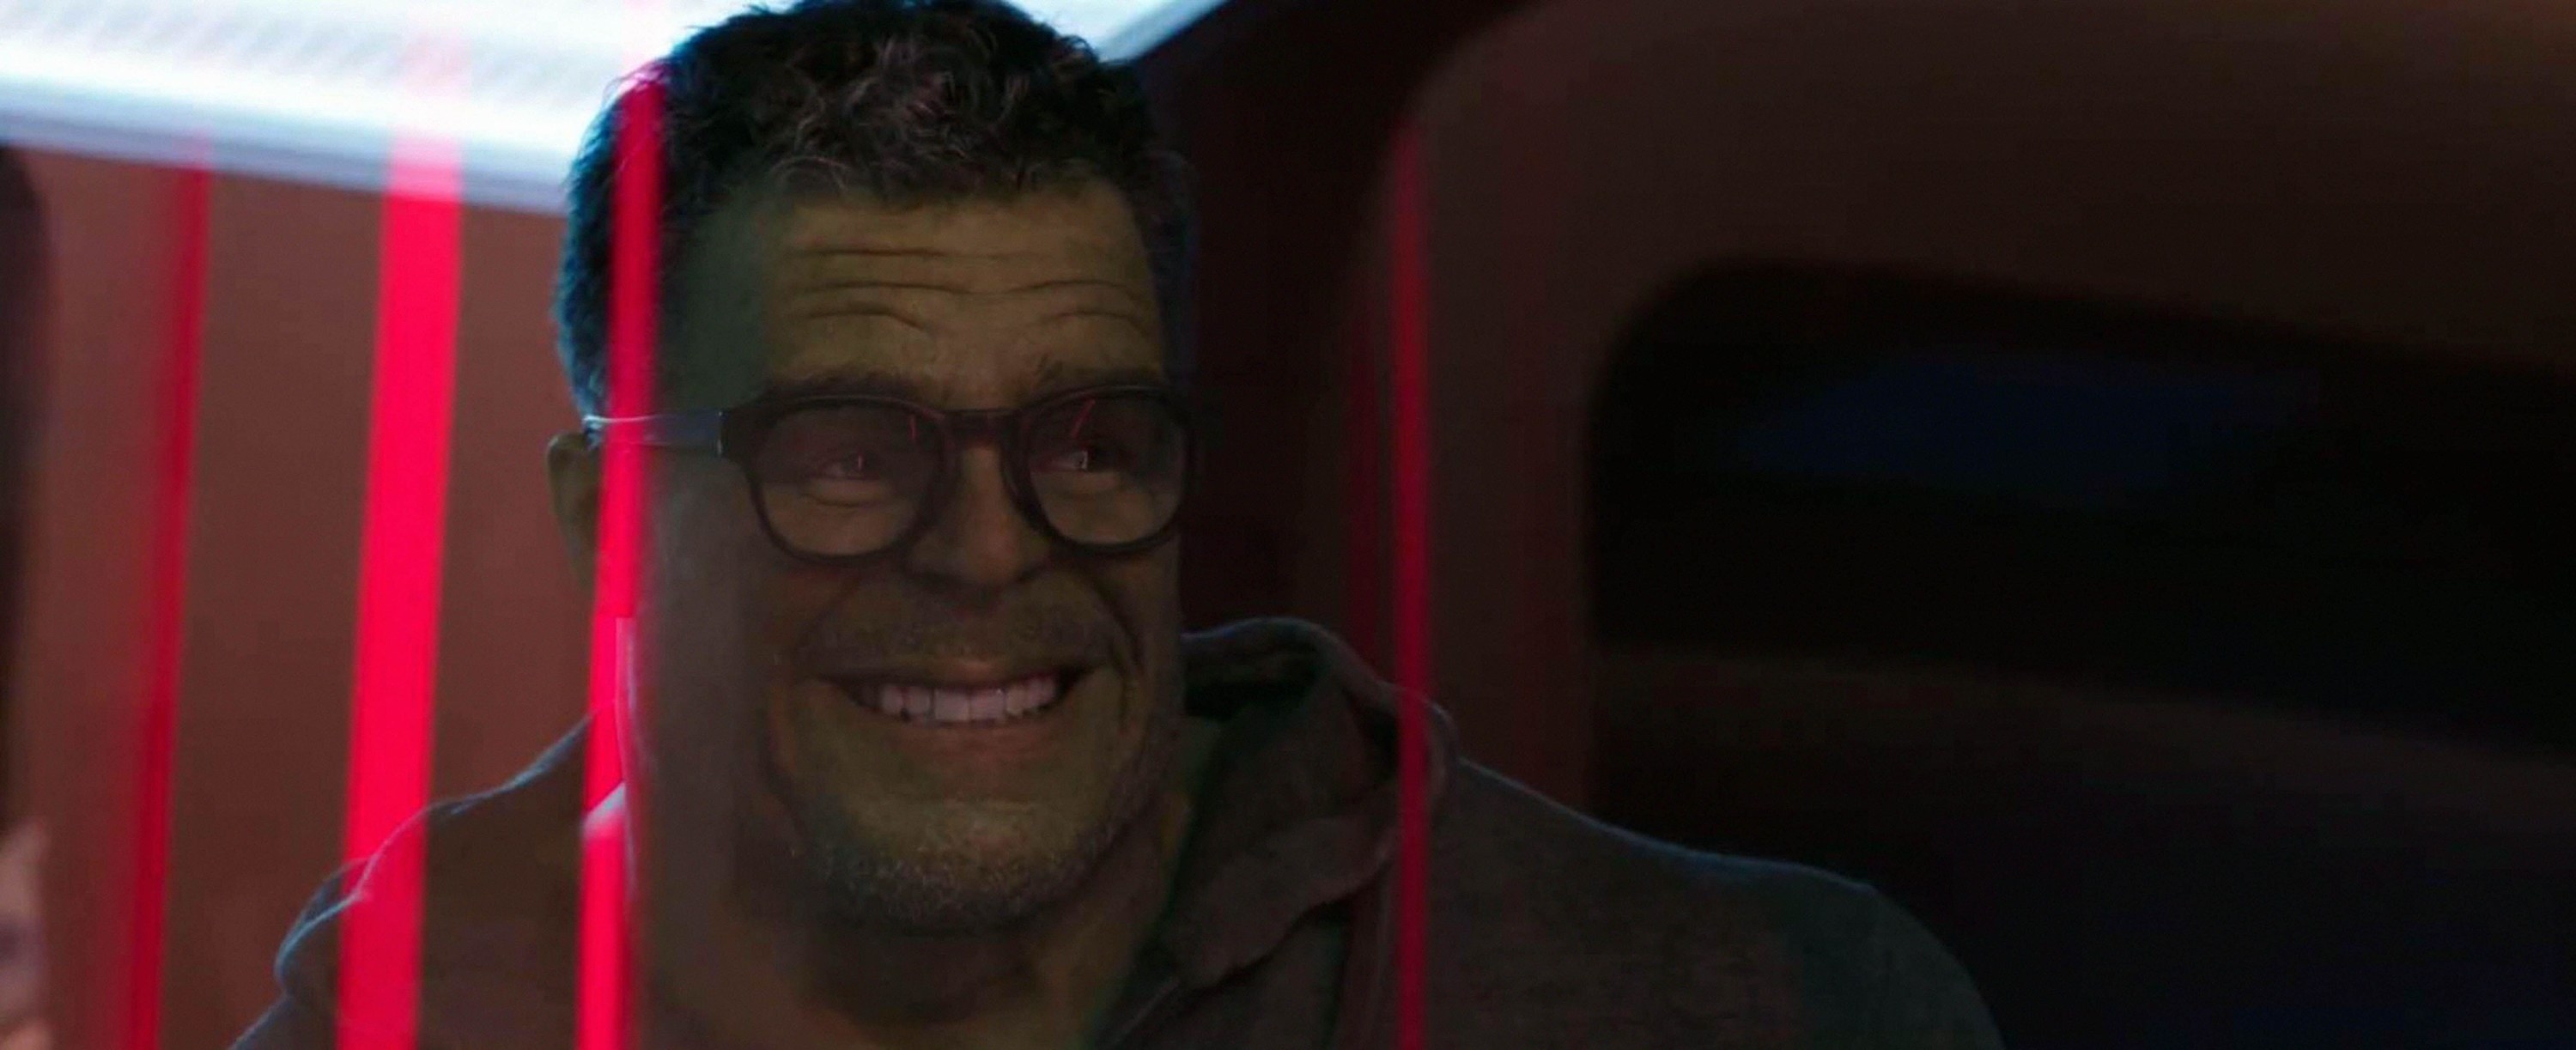 Bruce Banner offers a mischievous smile in &quot;She-Hulk: Attorney at Law&quot;